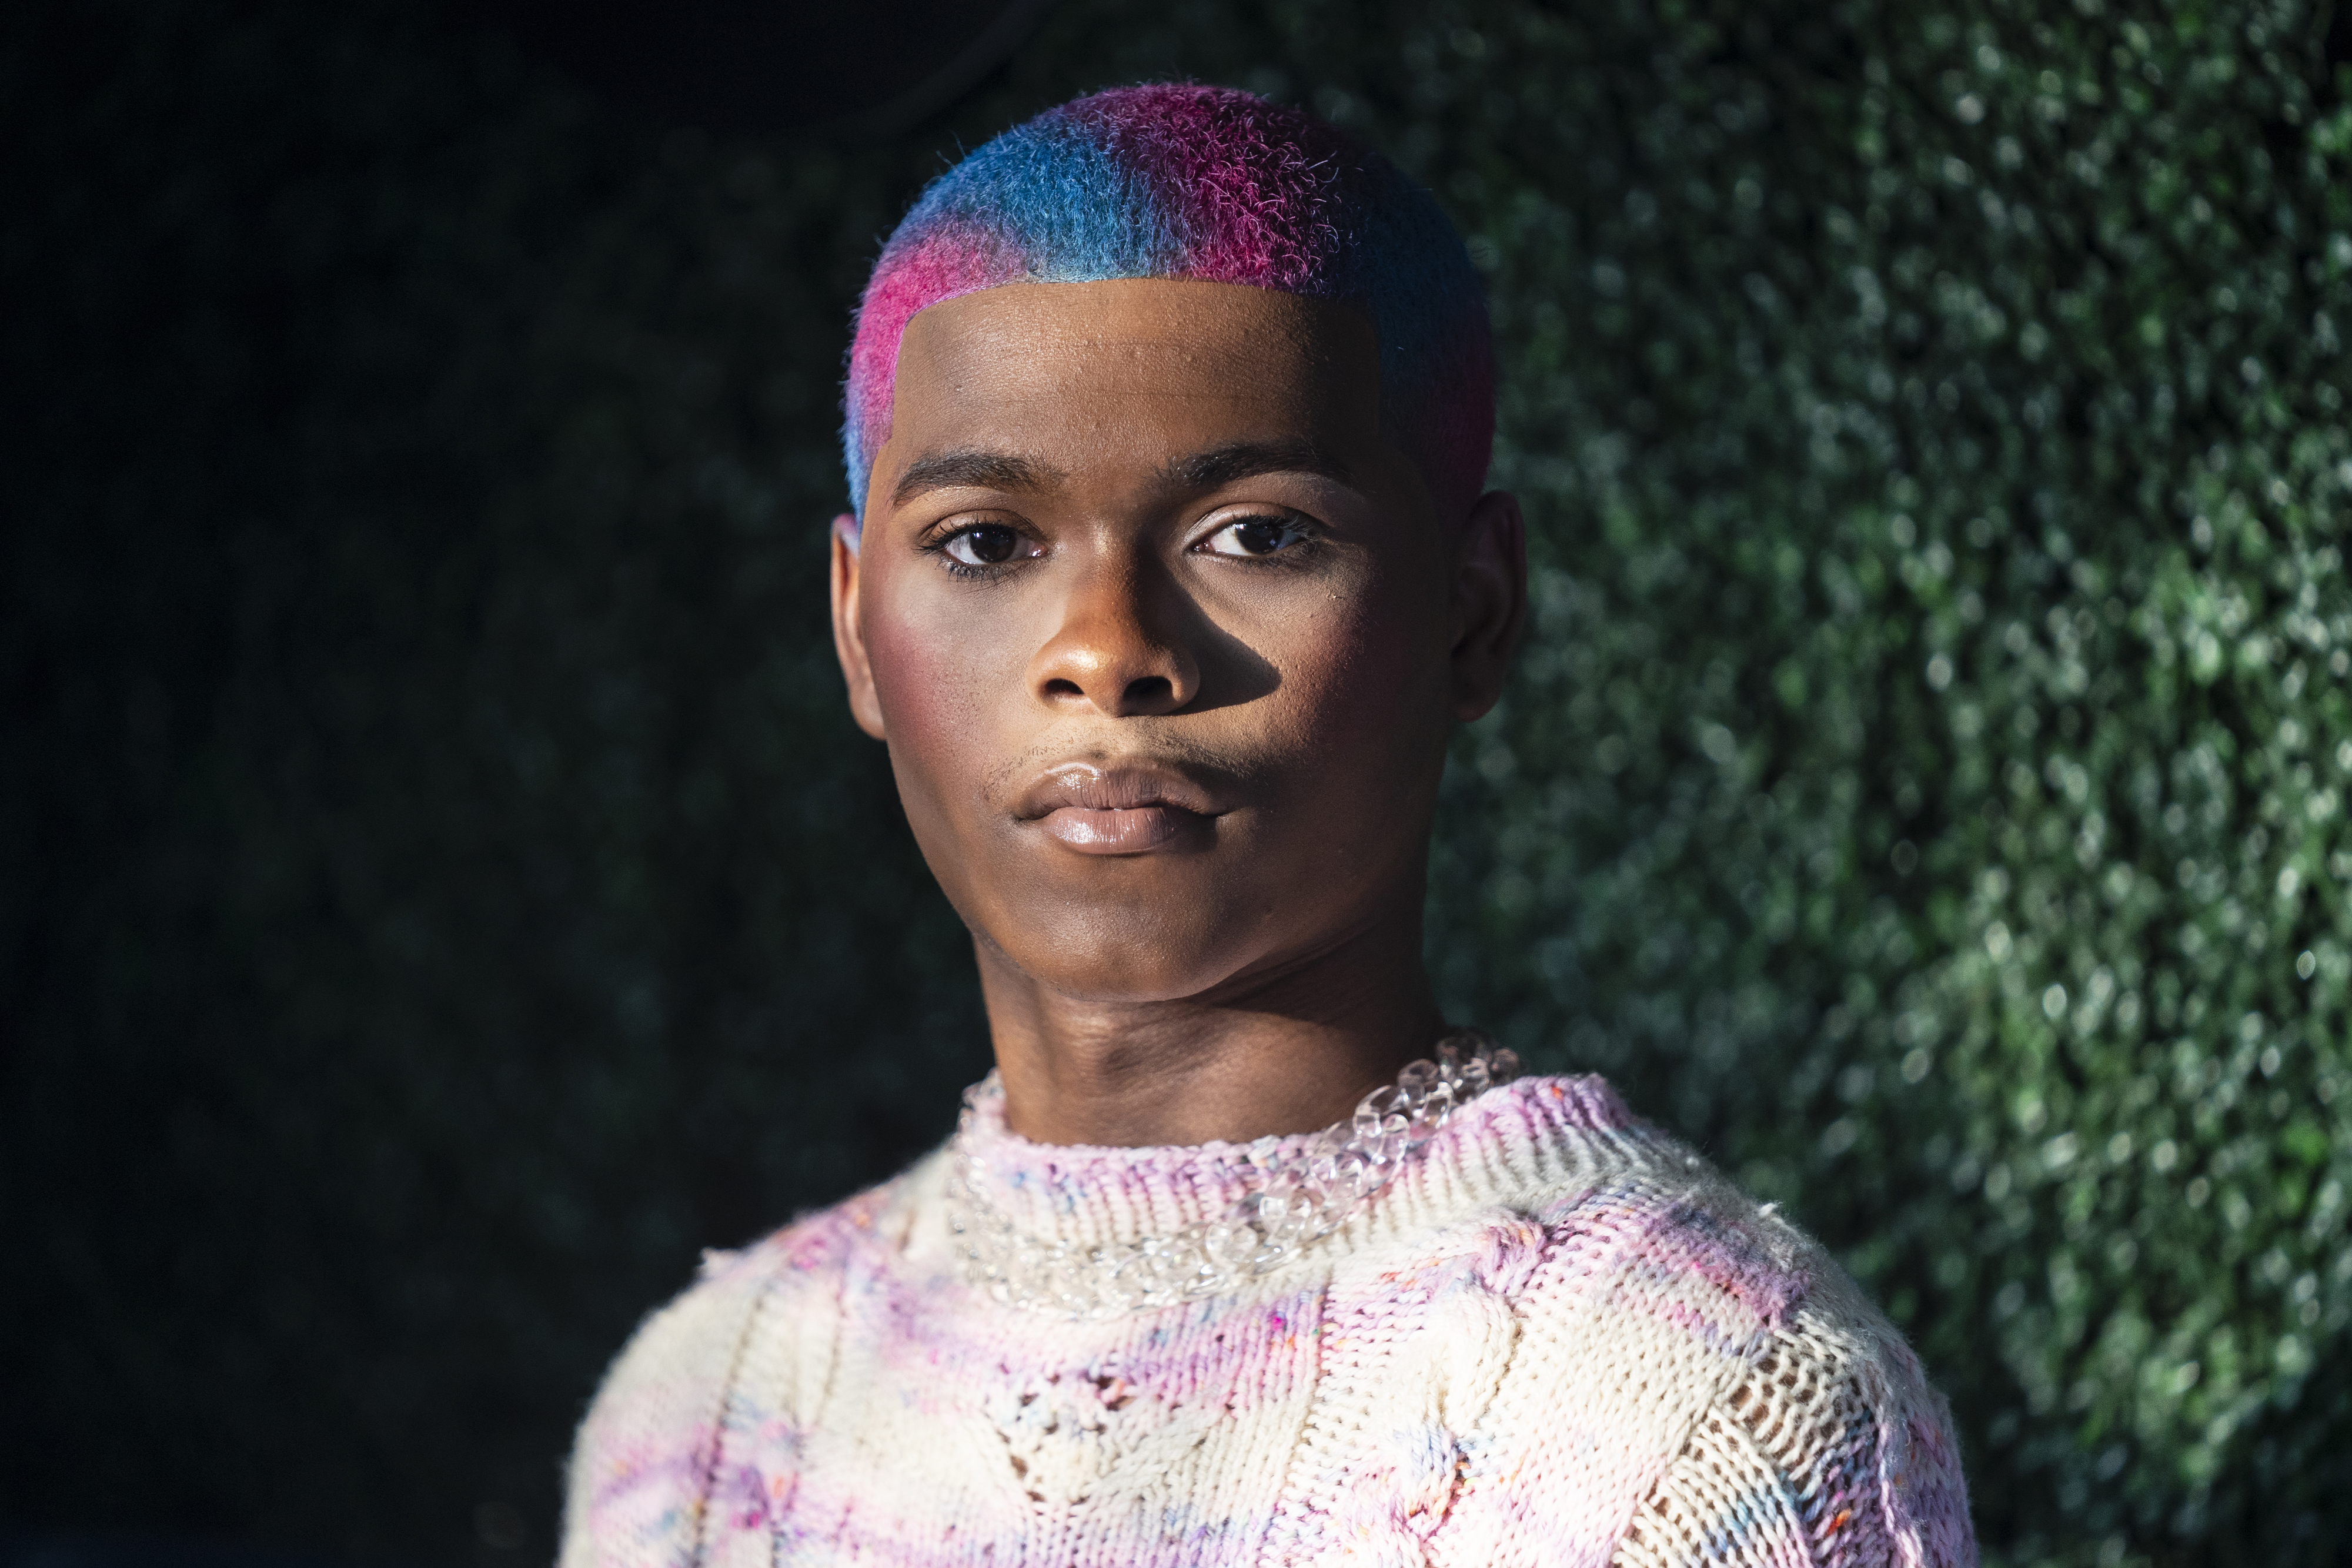 Kidd Kenn with a multicolored hair design and a textured sweater posing for the camera